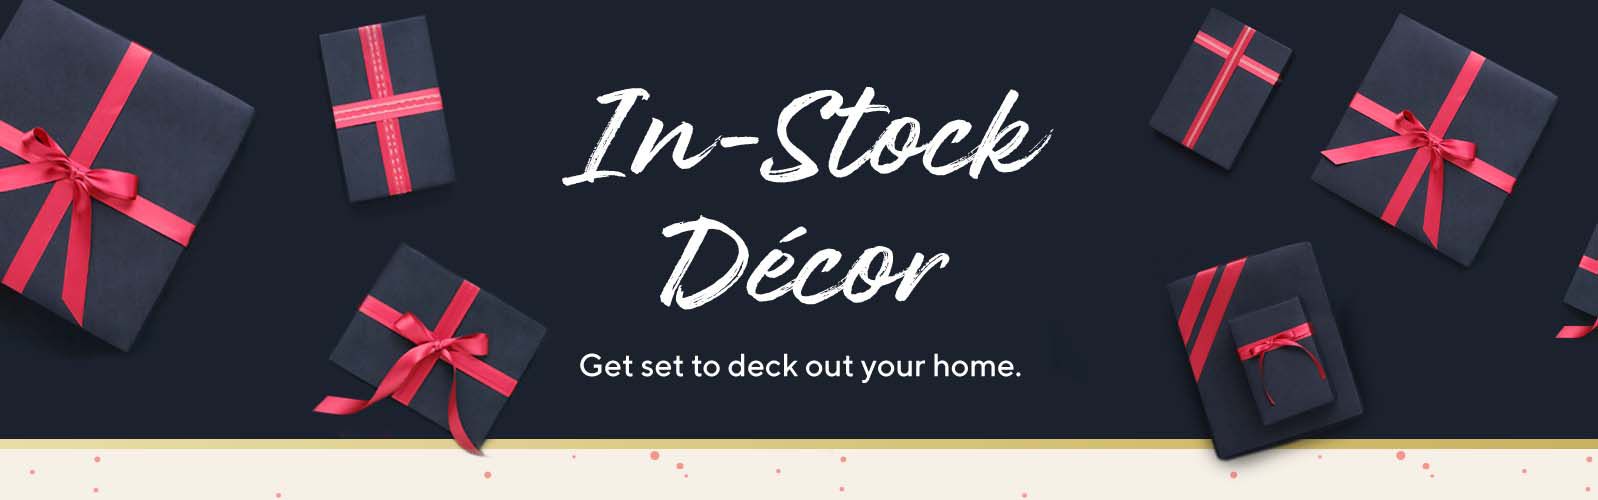 In-Stock Décor - Get set to deck out your home.